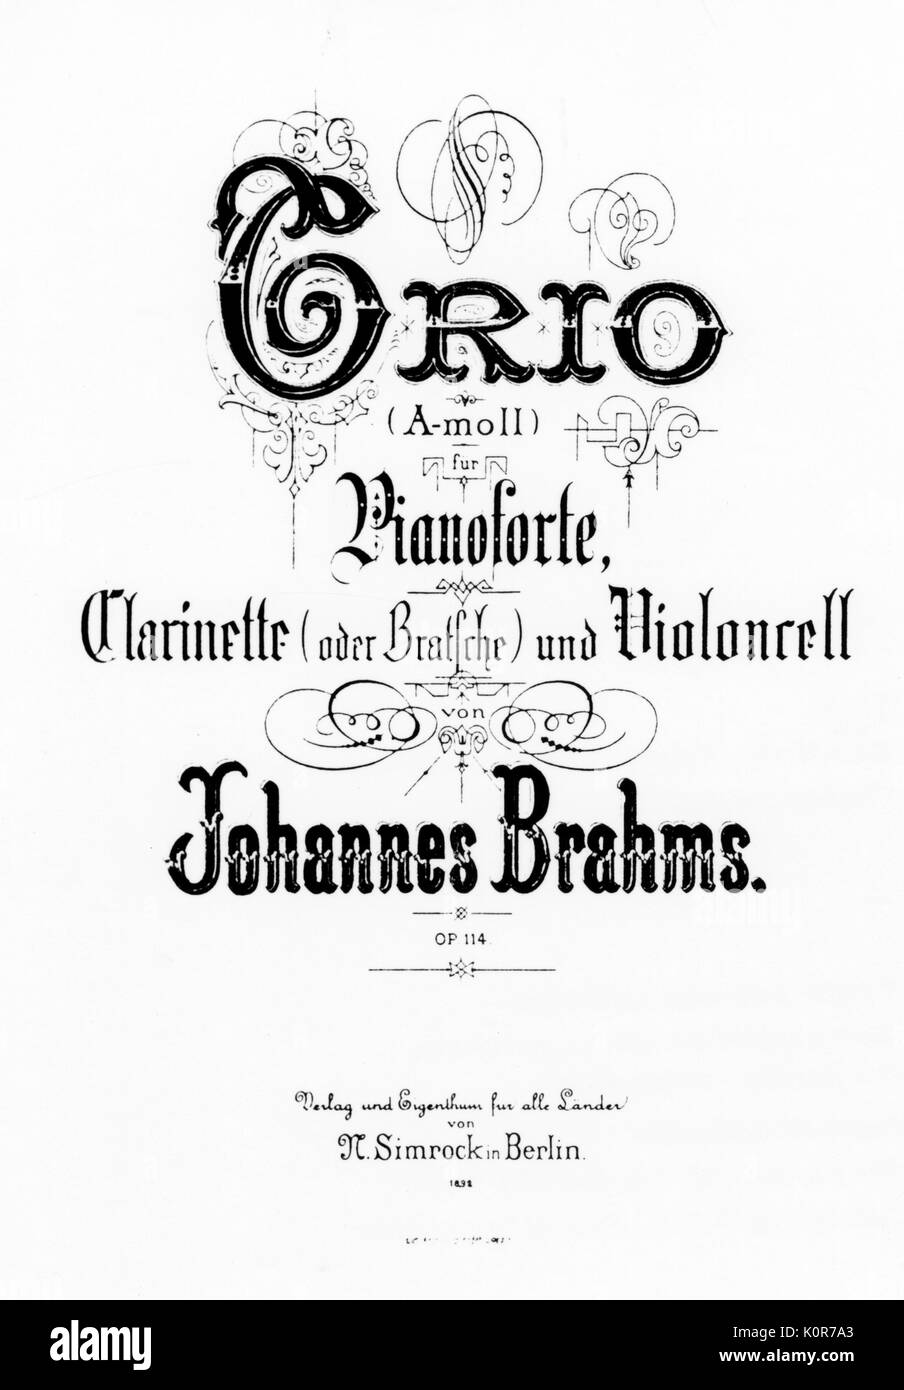 BRAHMS - Trio for piano and clarinet,  Op. 114 German composer (1833-1897) Stock Photo